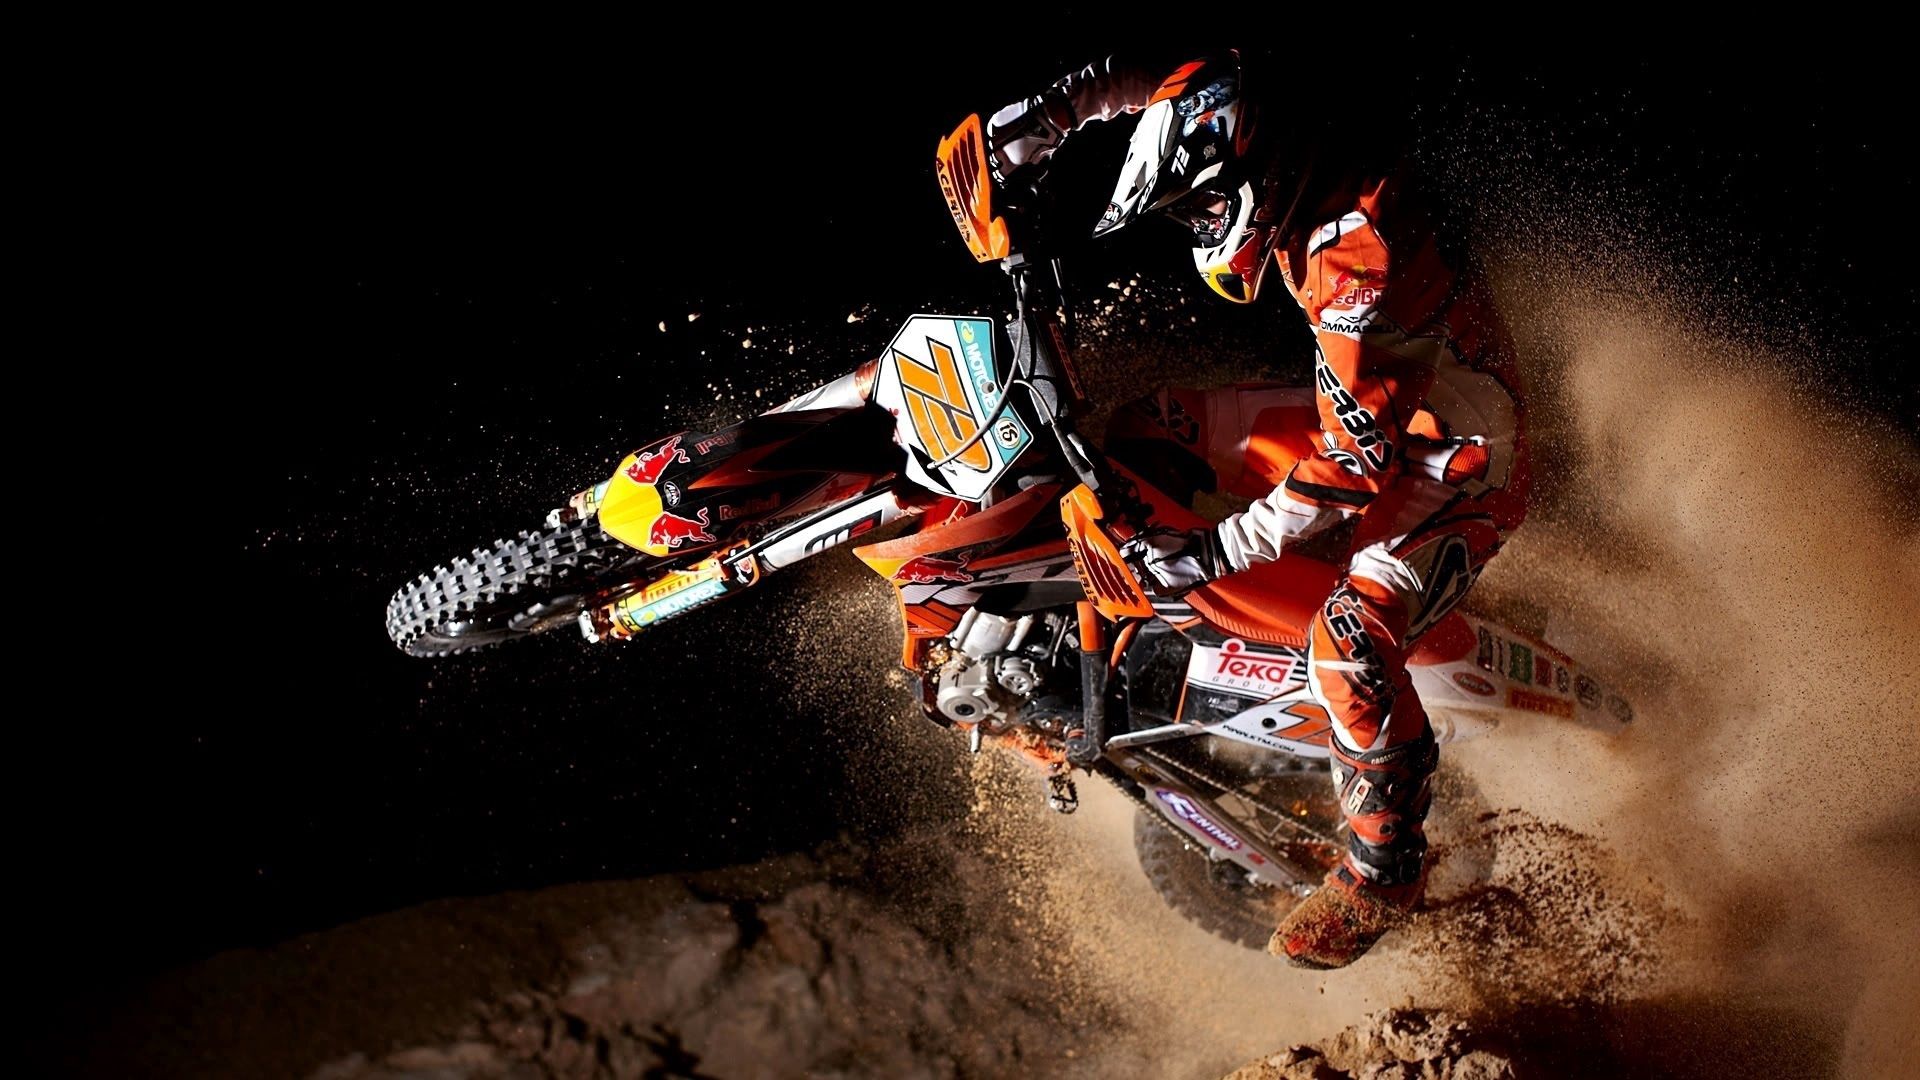 Windows Backgrounds motorcycle, motorcycles, x fighters, x games